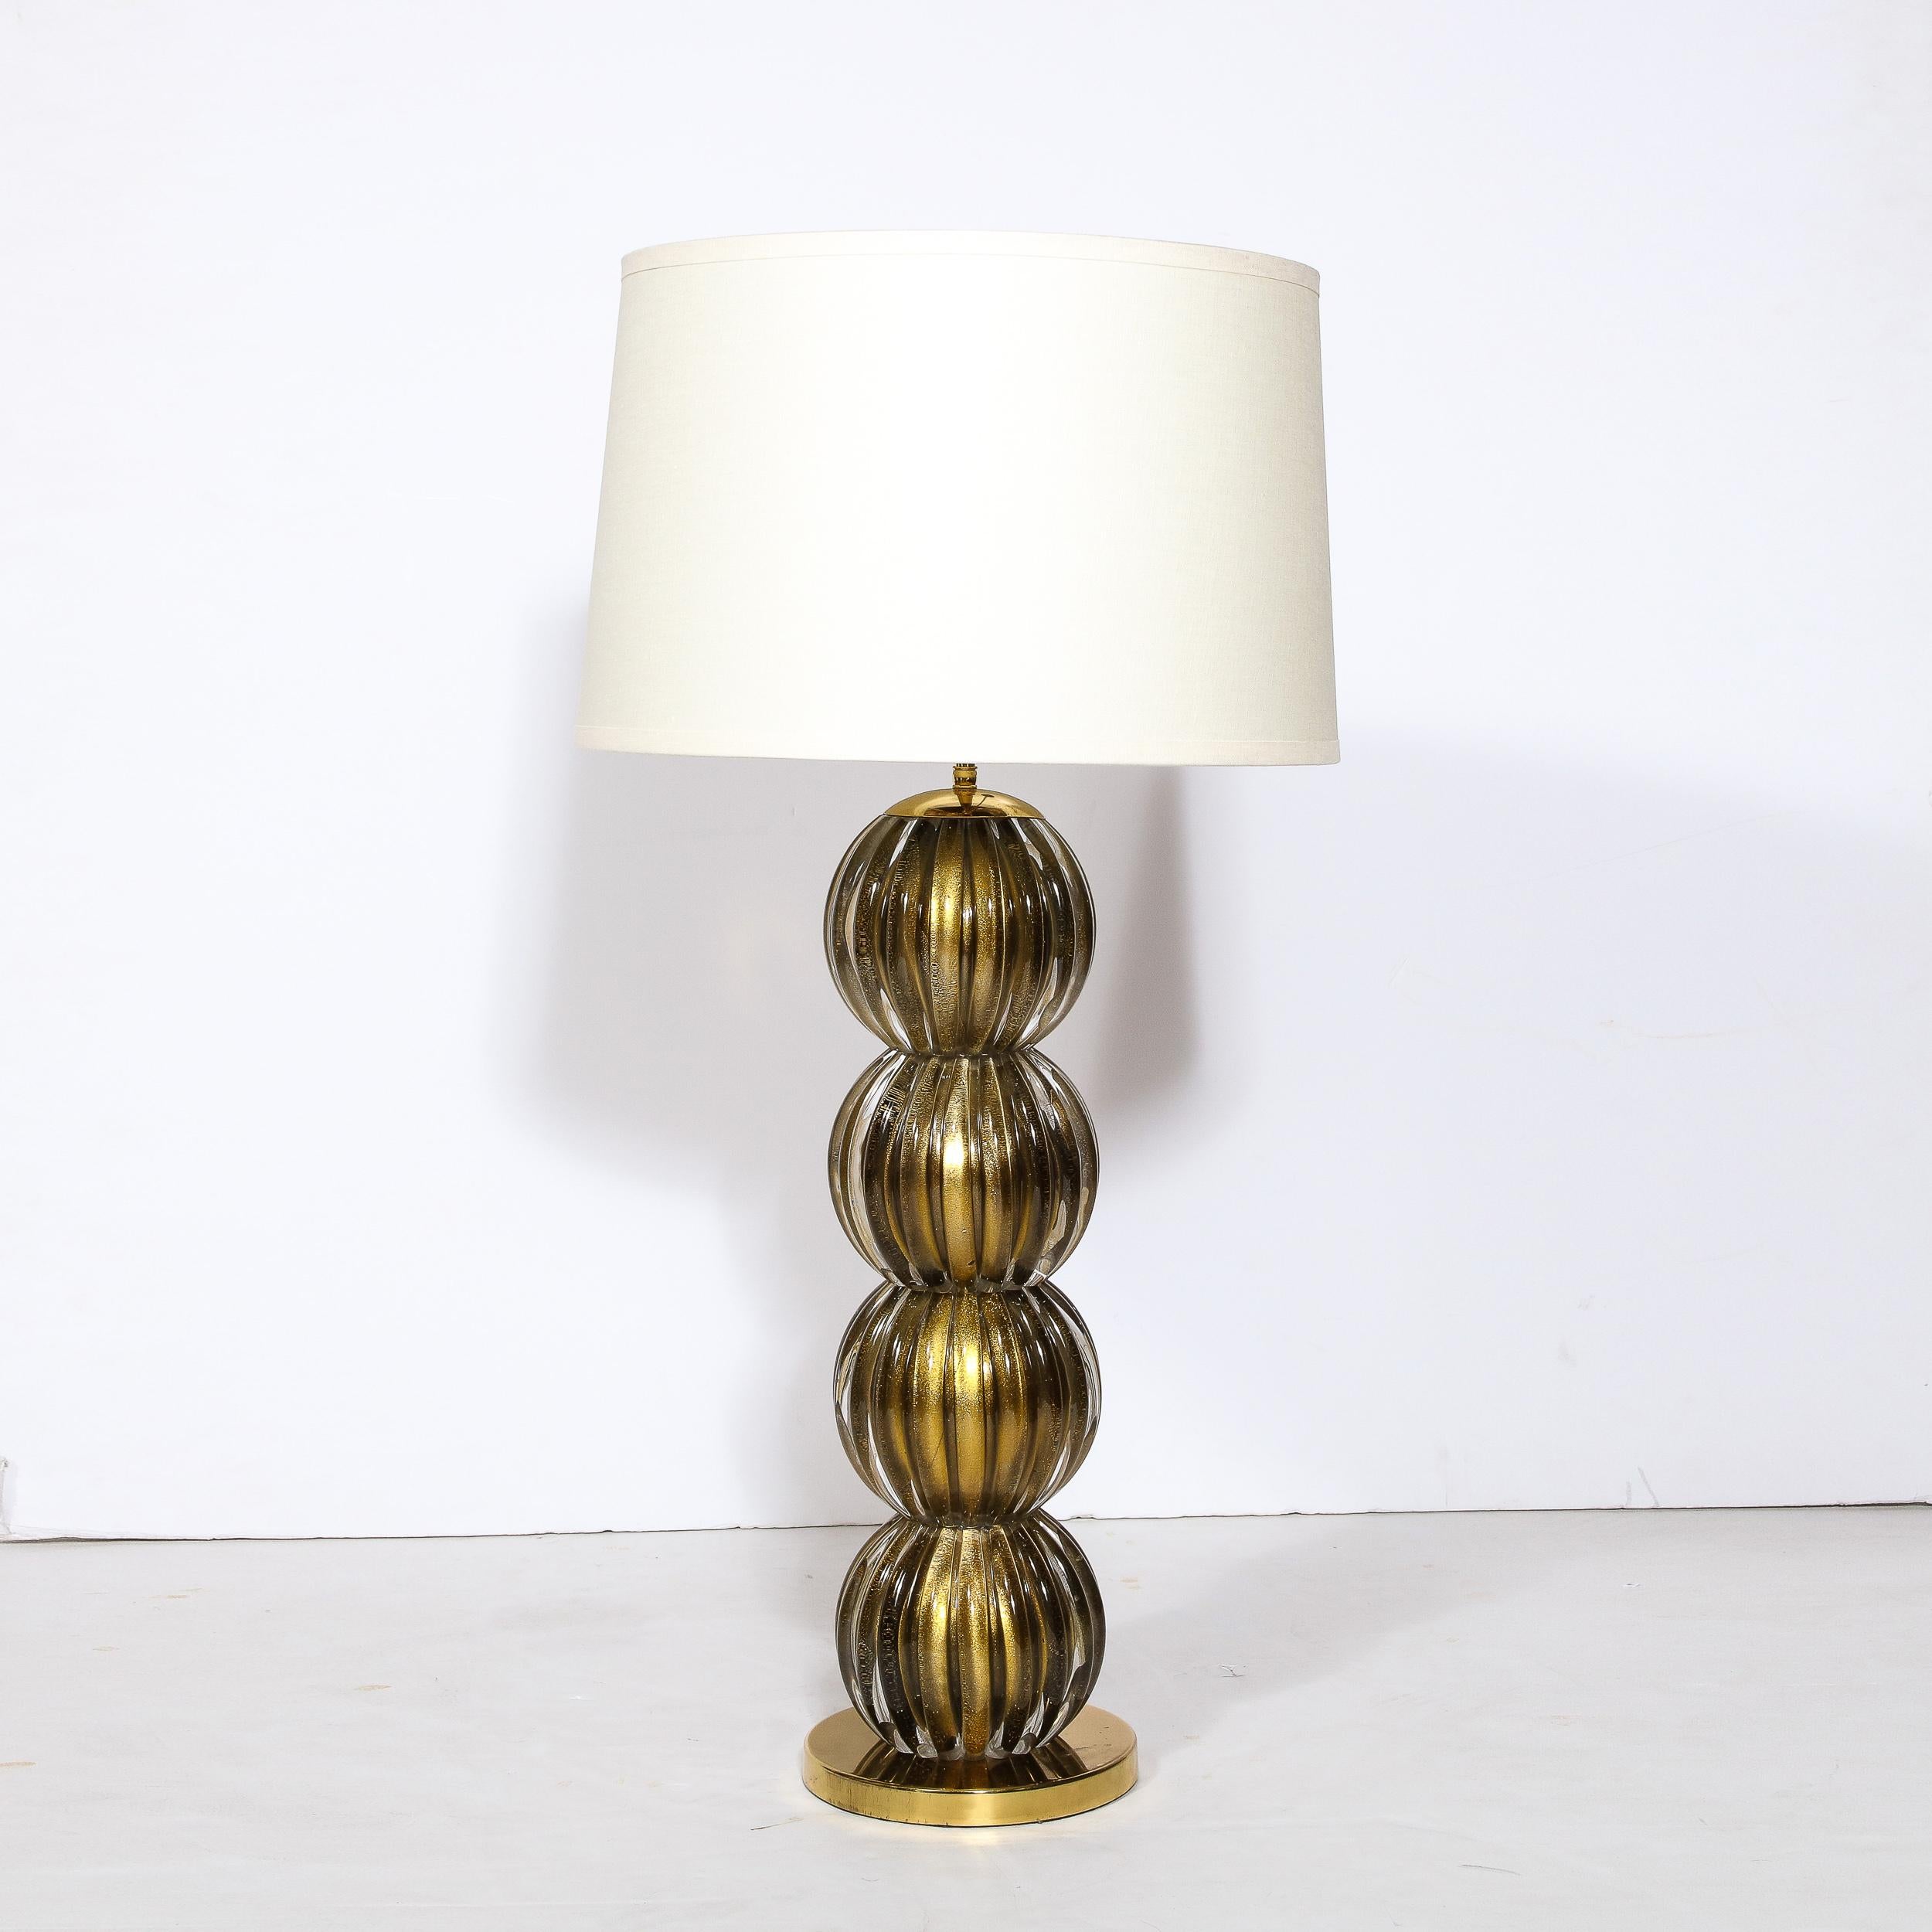 Large Scale Modern Hand-Blown Murano Glass Table Lamps in Smoked Gold In Excellent Condition For Sale In New York, NY